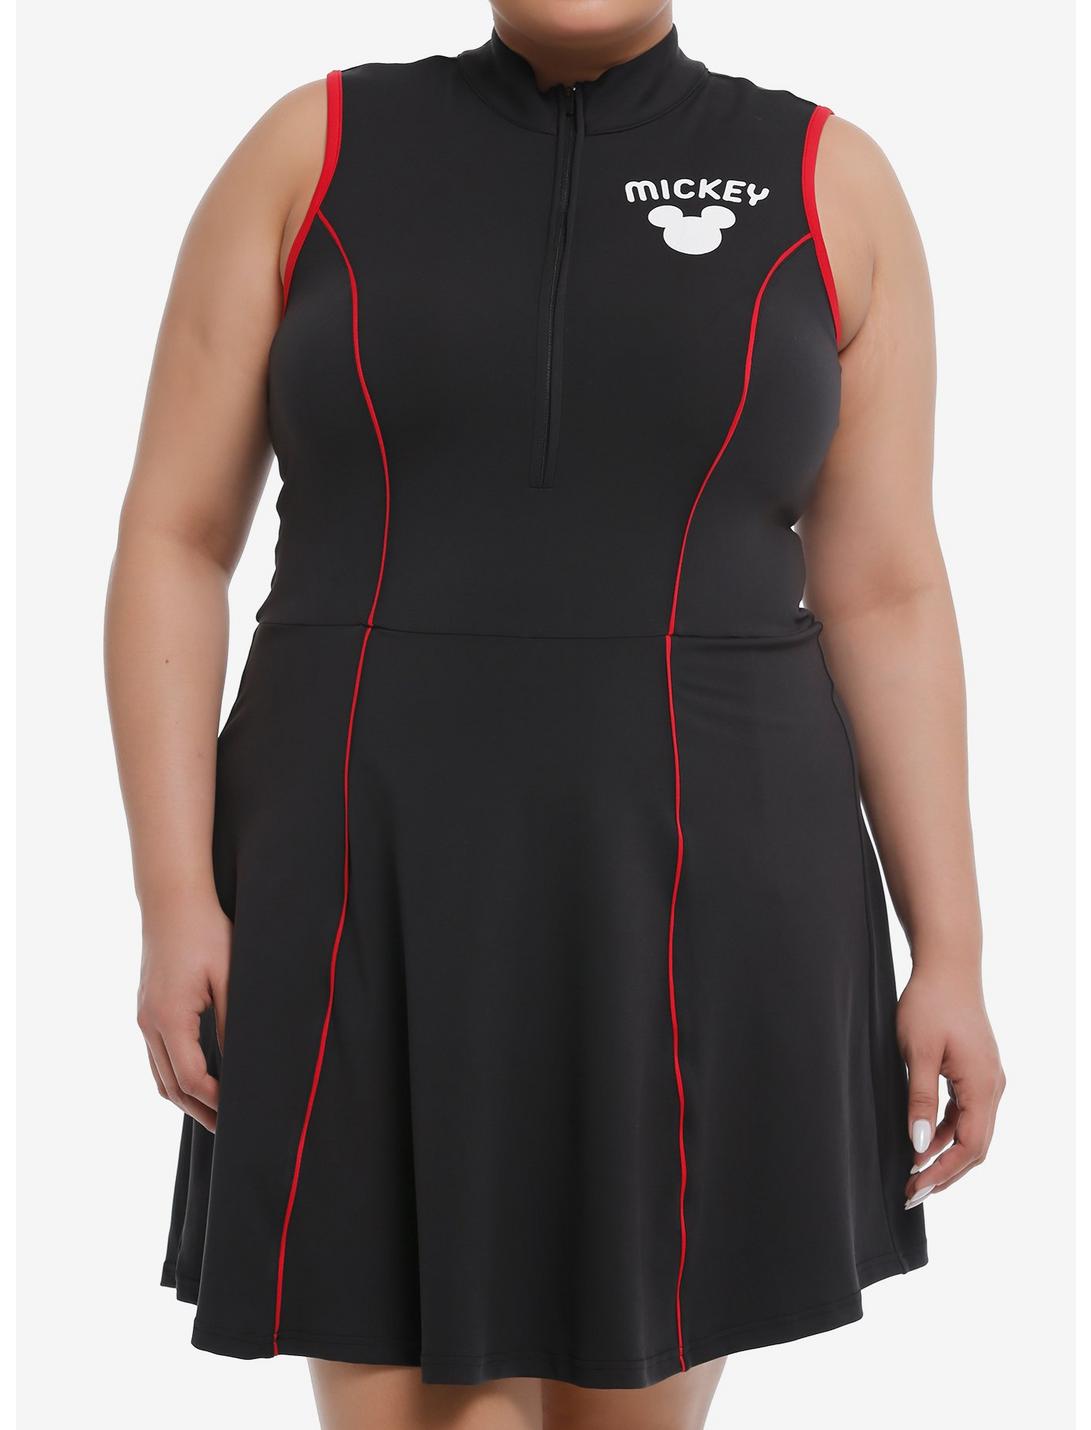 Her Universe Disney Mickey Mouse Athletic Dress Plus Size Her Universe Exclusive, BLACK, hi-res